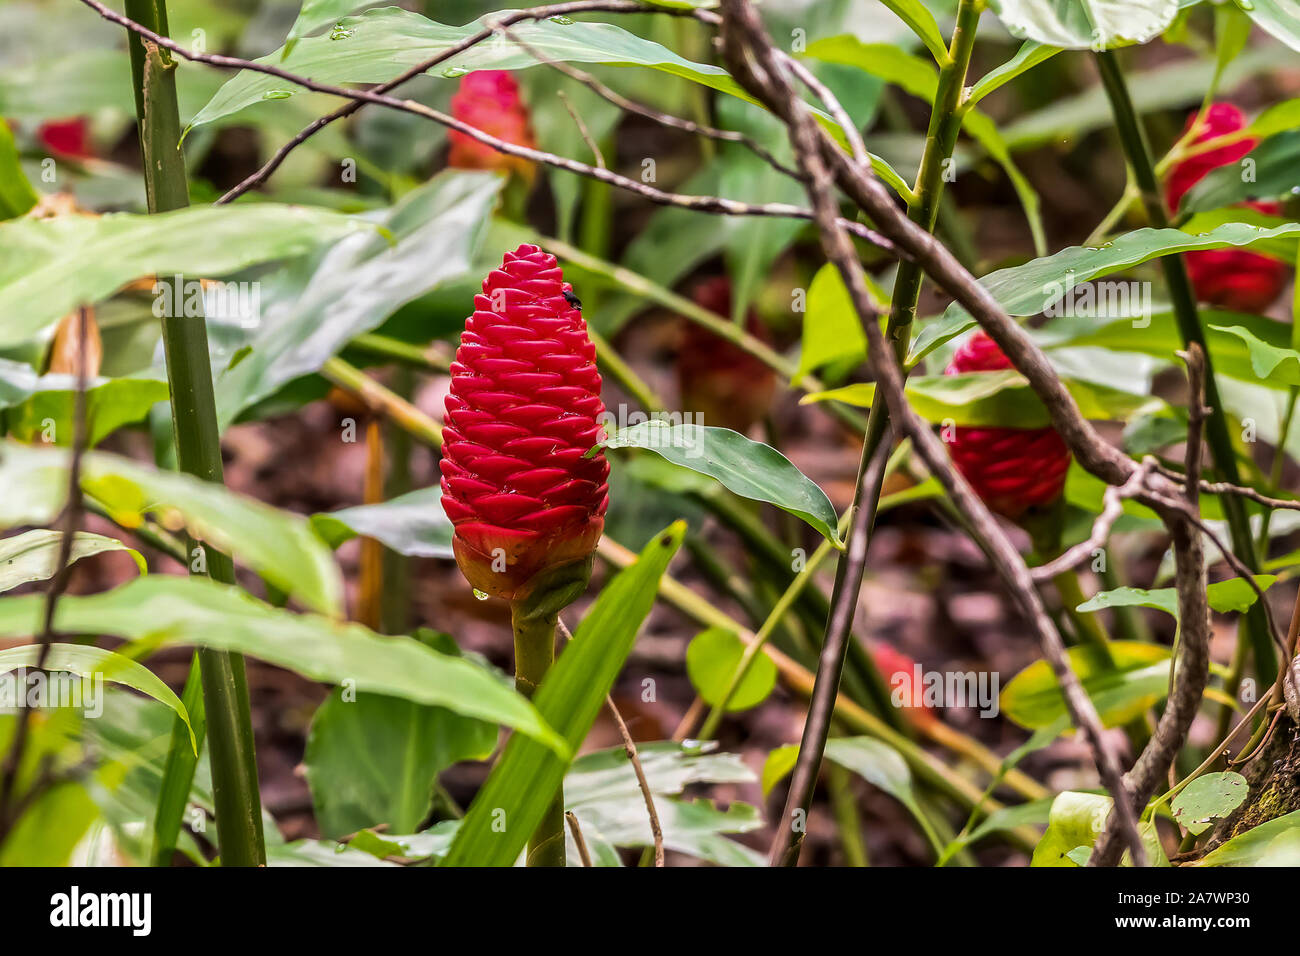 Red ginger flower that looks like a pine cone Stock Photo